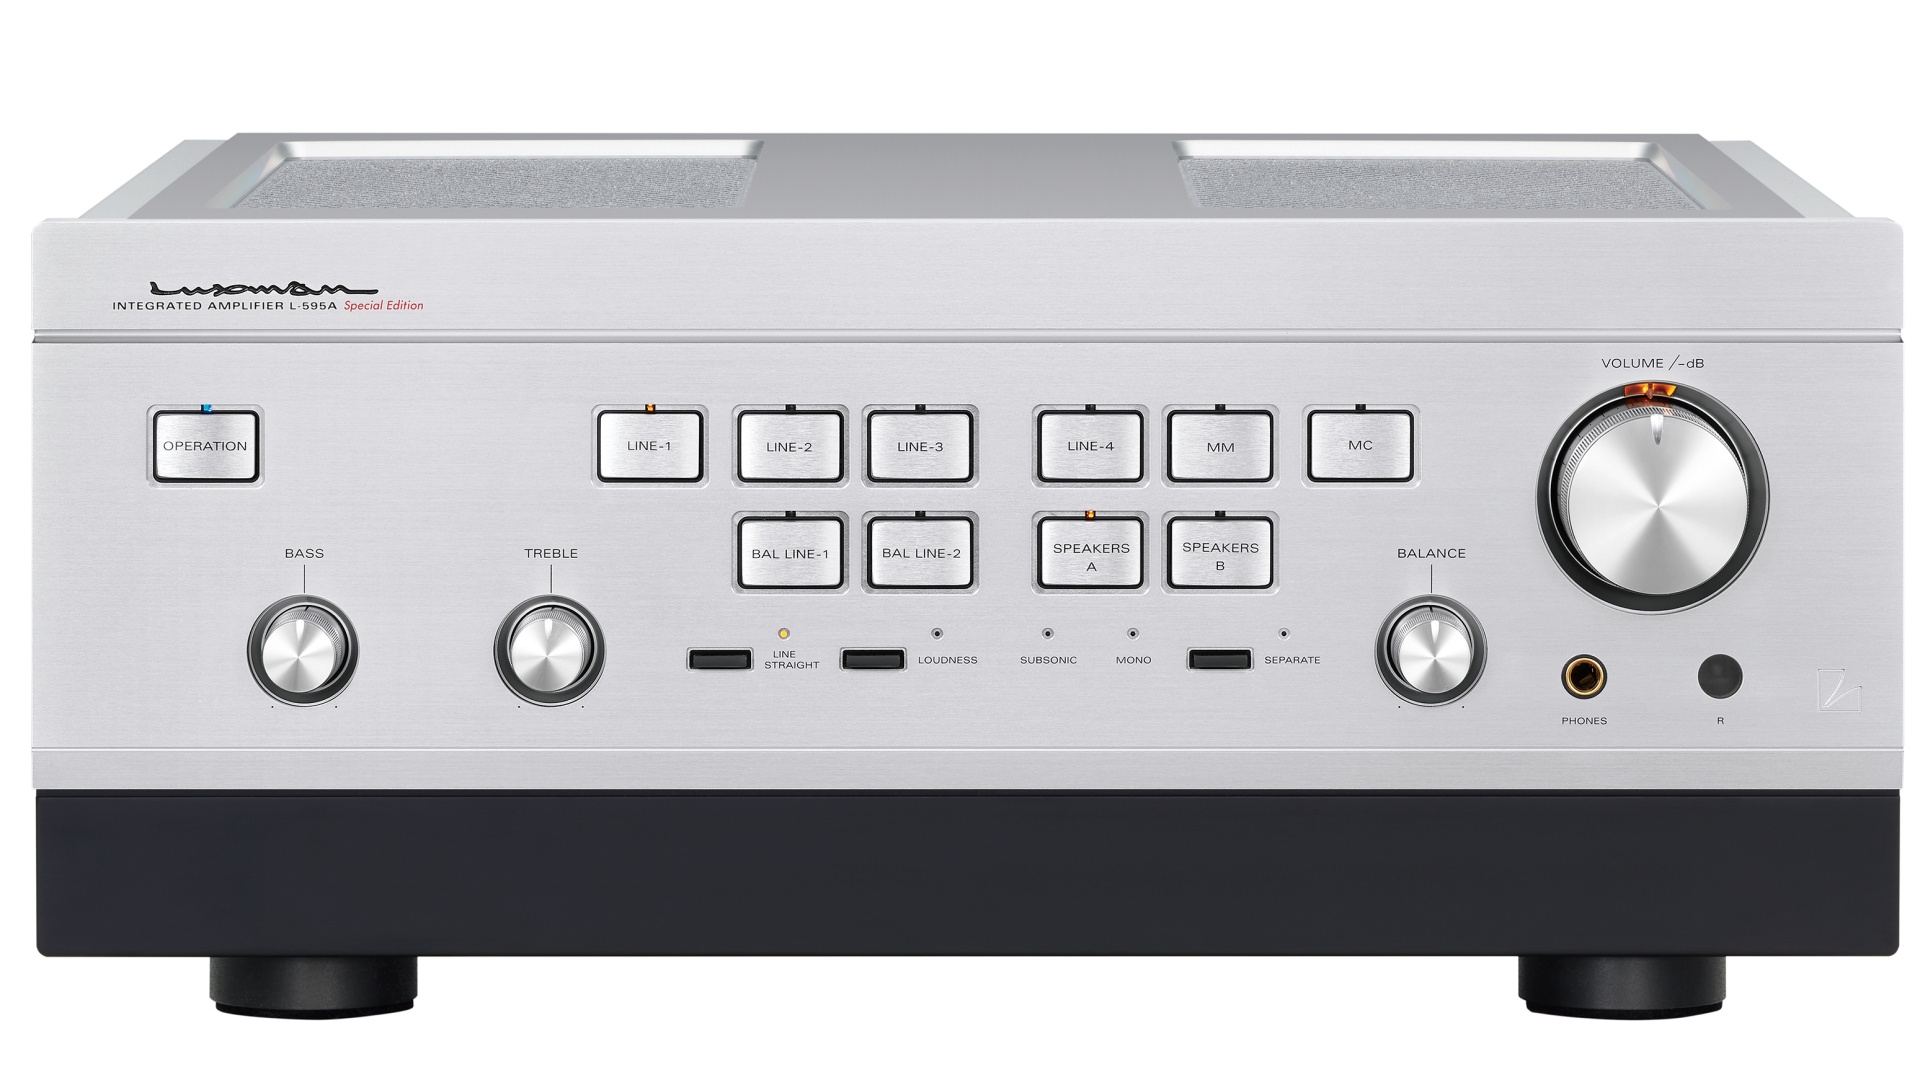 Luxman launches limited edition L-595A SE integrated amplifier | What Hi-Fi?